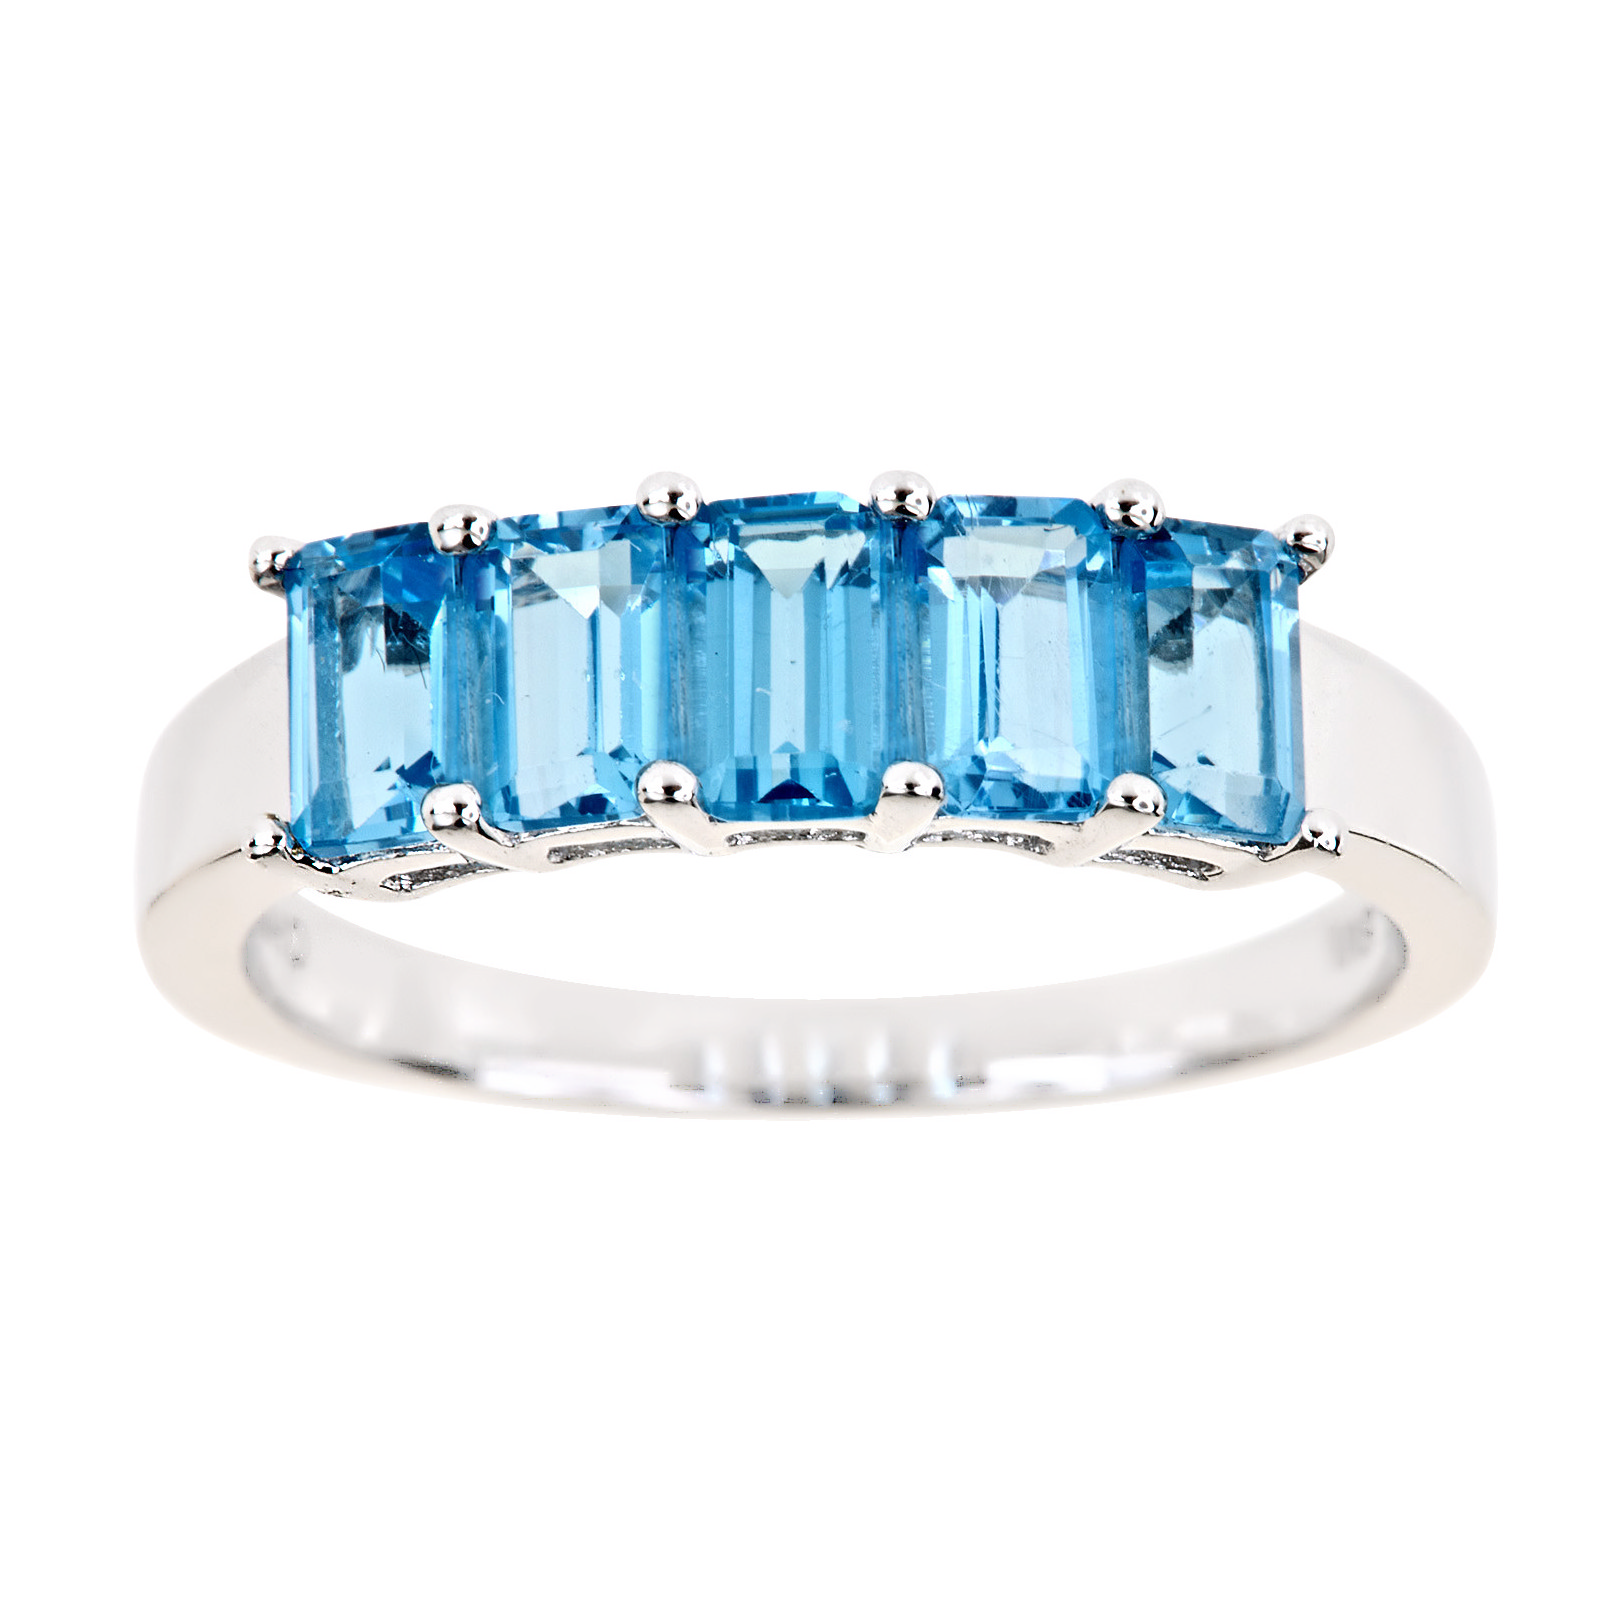 Ladies Sterling Silver 5 Stone  Emerald Cut Blue Topaz Ring